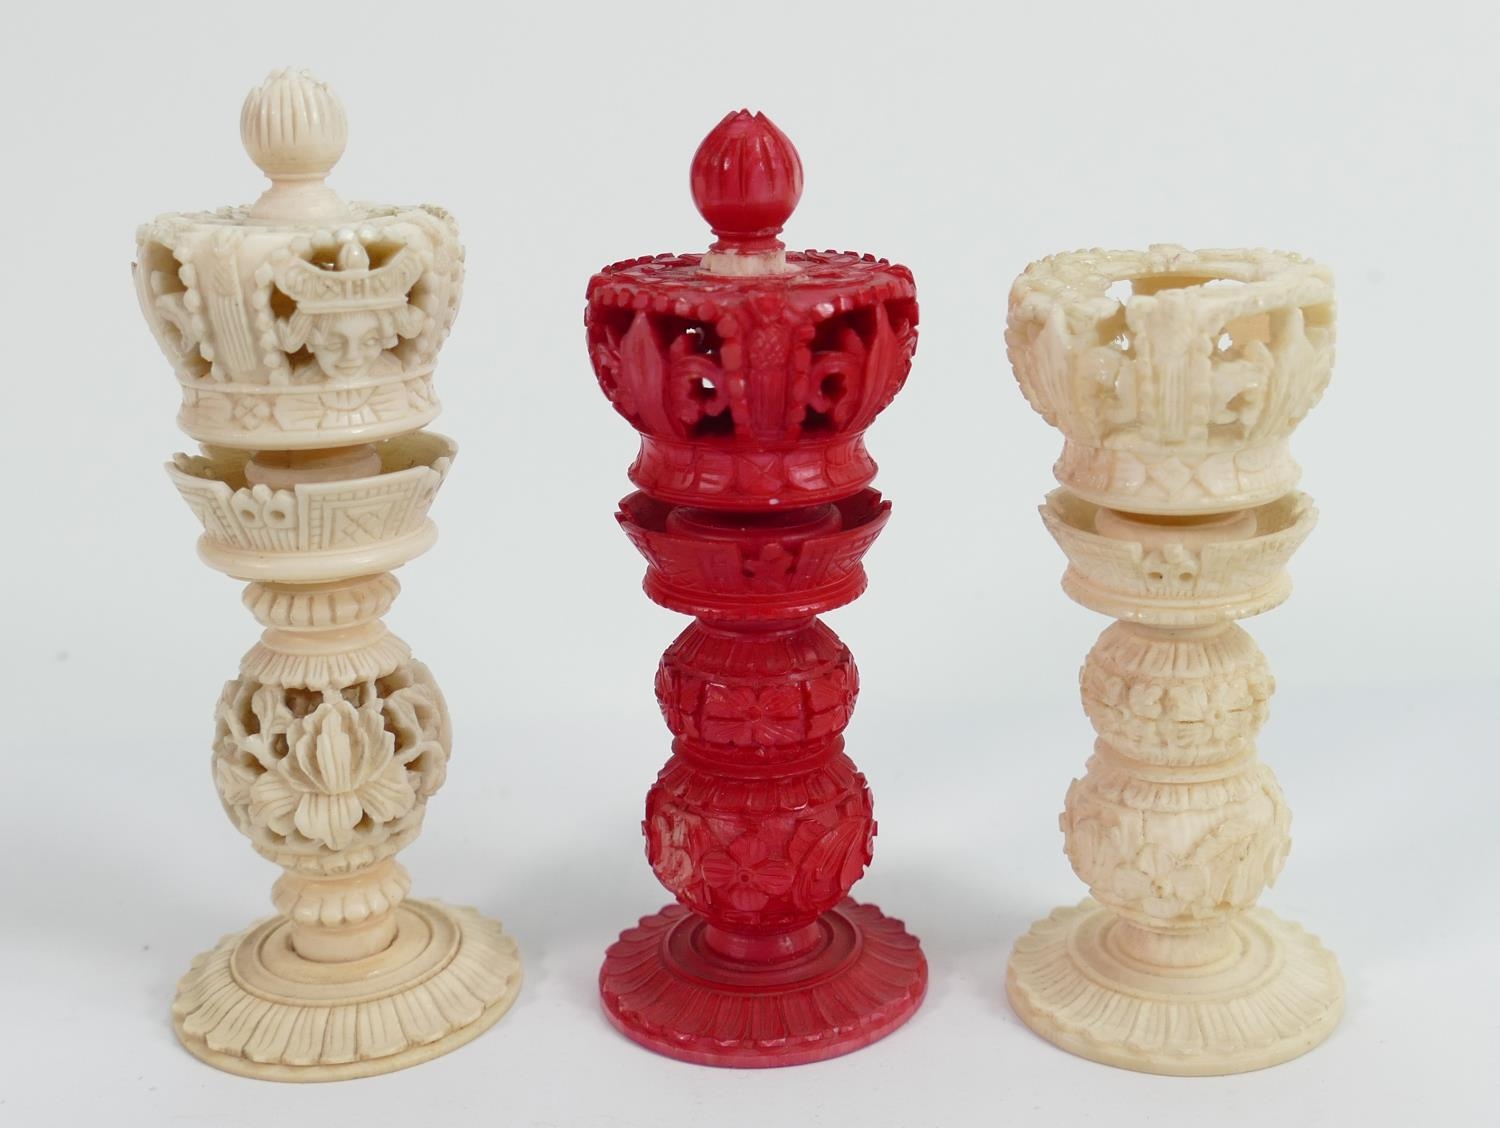 A collection of early Bone Chess Pieces: tallest 9cm,damaged crown on white & top pommel of red